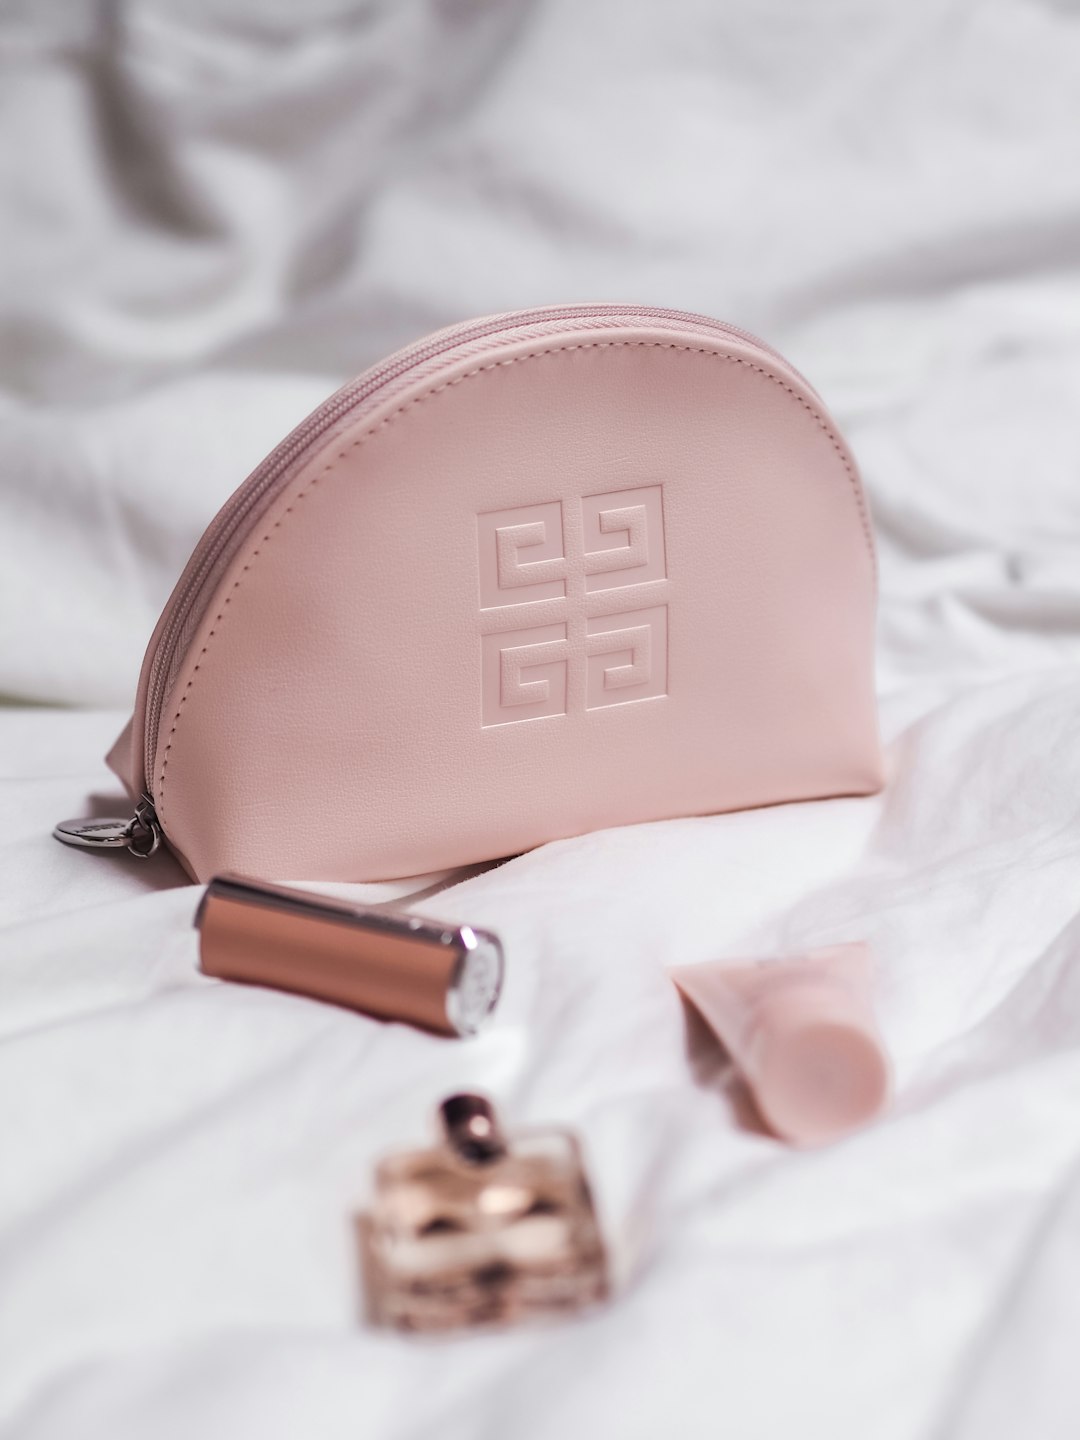 pink leather sling bag on white textile